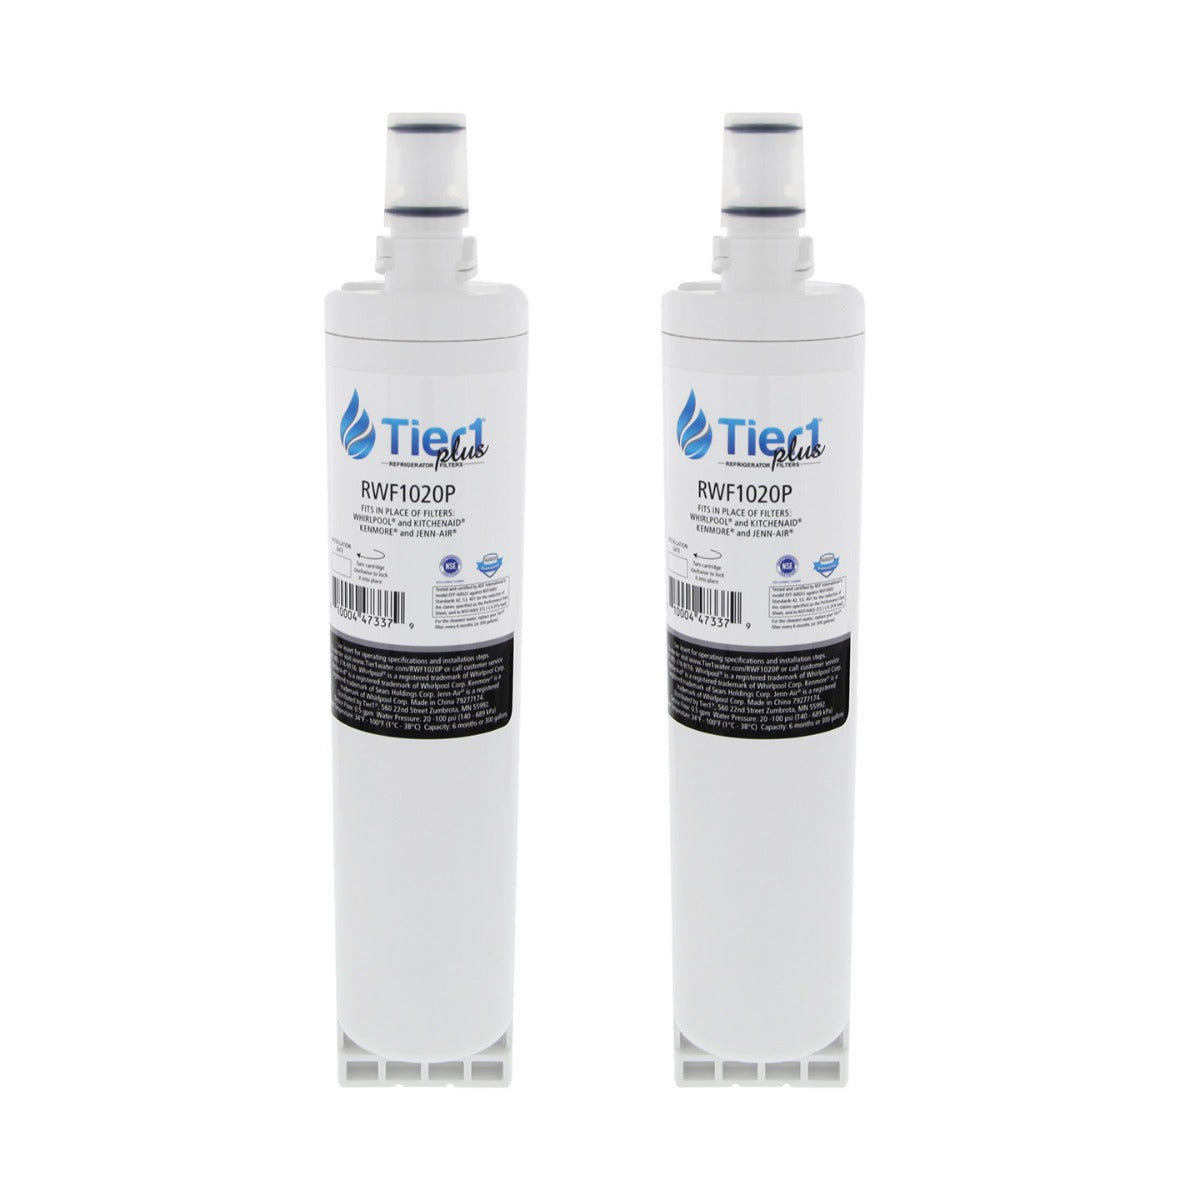 Tier1 Plus EveryDrop EDR5RXD1 Whirlpool 4396508/4396510 Comparable Lead And Mercury Reducing Refrigerator Water Filter